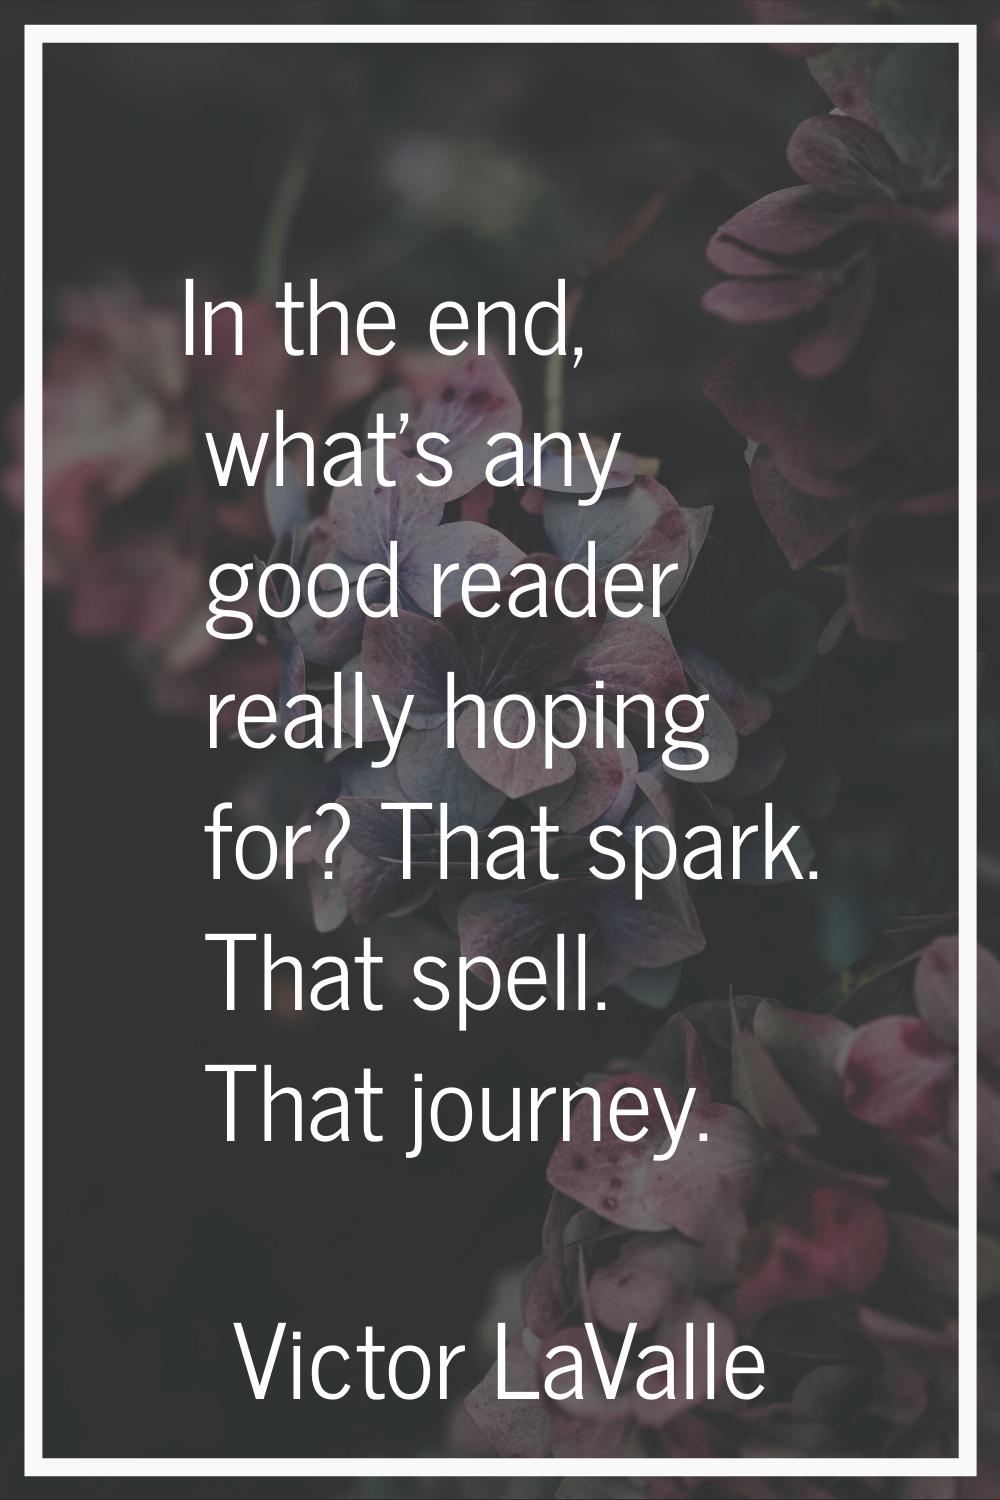 In the end, what's any good reader really hoping for? That spark. That spell. That journey.